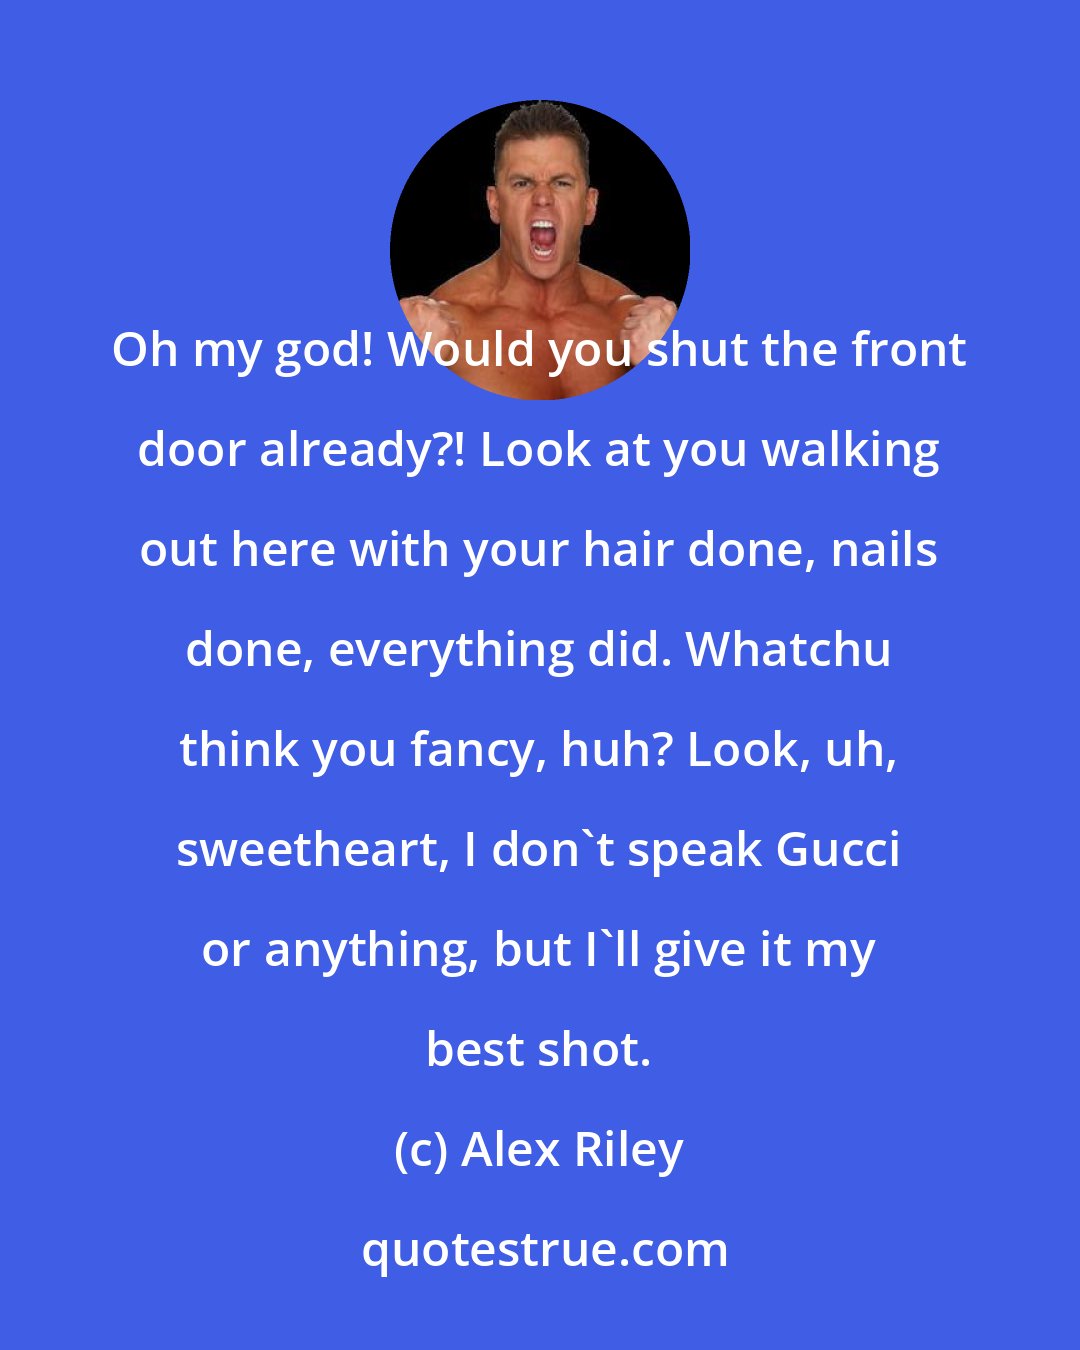 Alex Riley: Oh my god! Would you shut the front door already?! Look at you walking out here with your hair done, nails done, everything did. Whatchu think you fancy, huh? Look, uh, sweetheart, I don't speak Gucci or anything, but I'll give it my best shot.